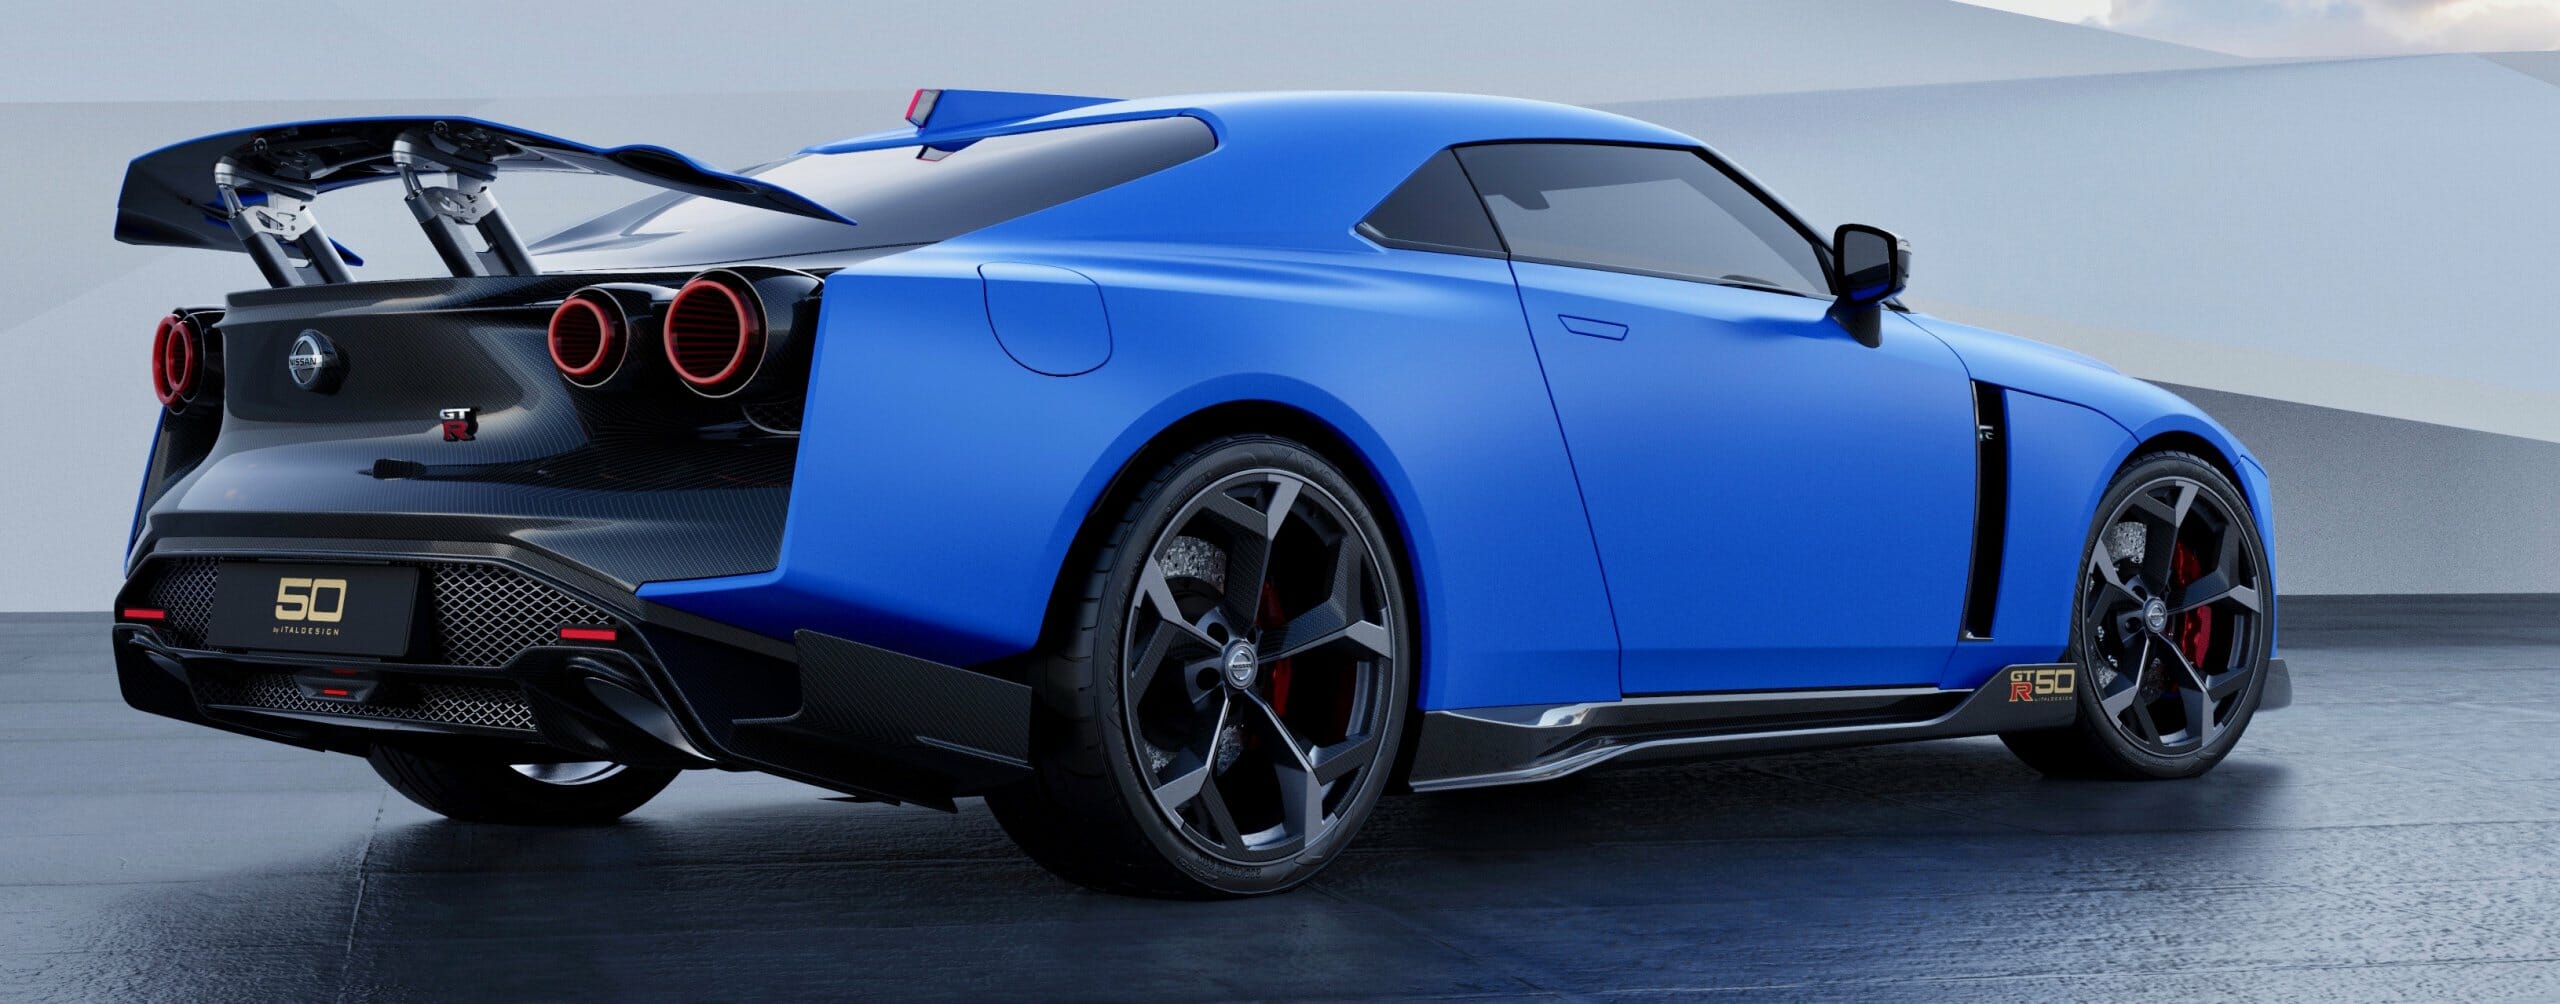 Nissan GT-R50, Limited-edition Nissan GT-R50 by Italdesign to be shown at Geneva, ClassicCars.com Journal